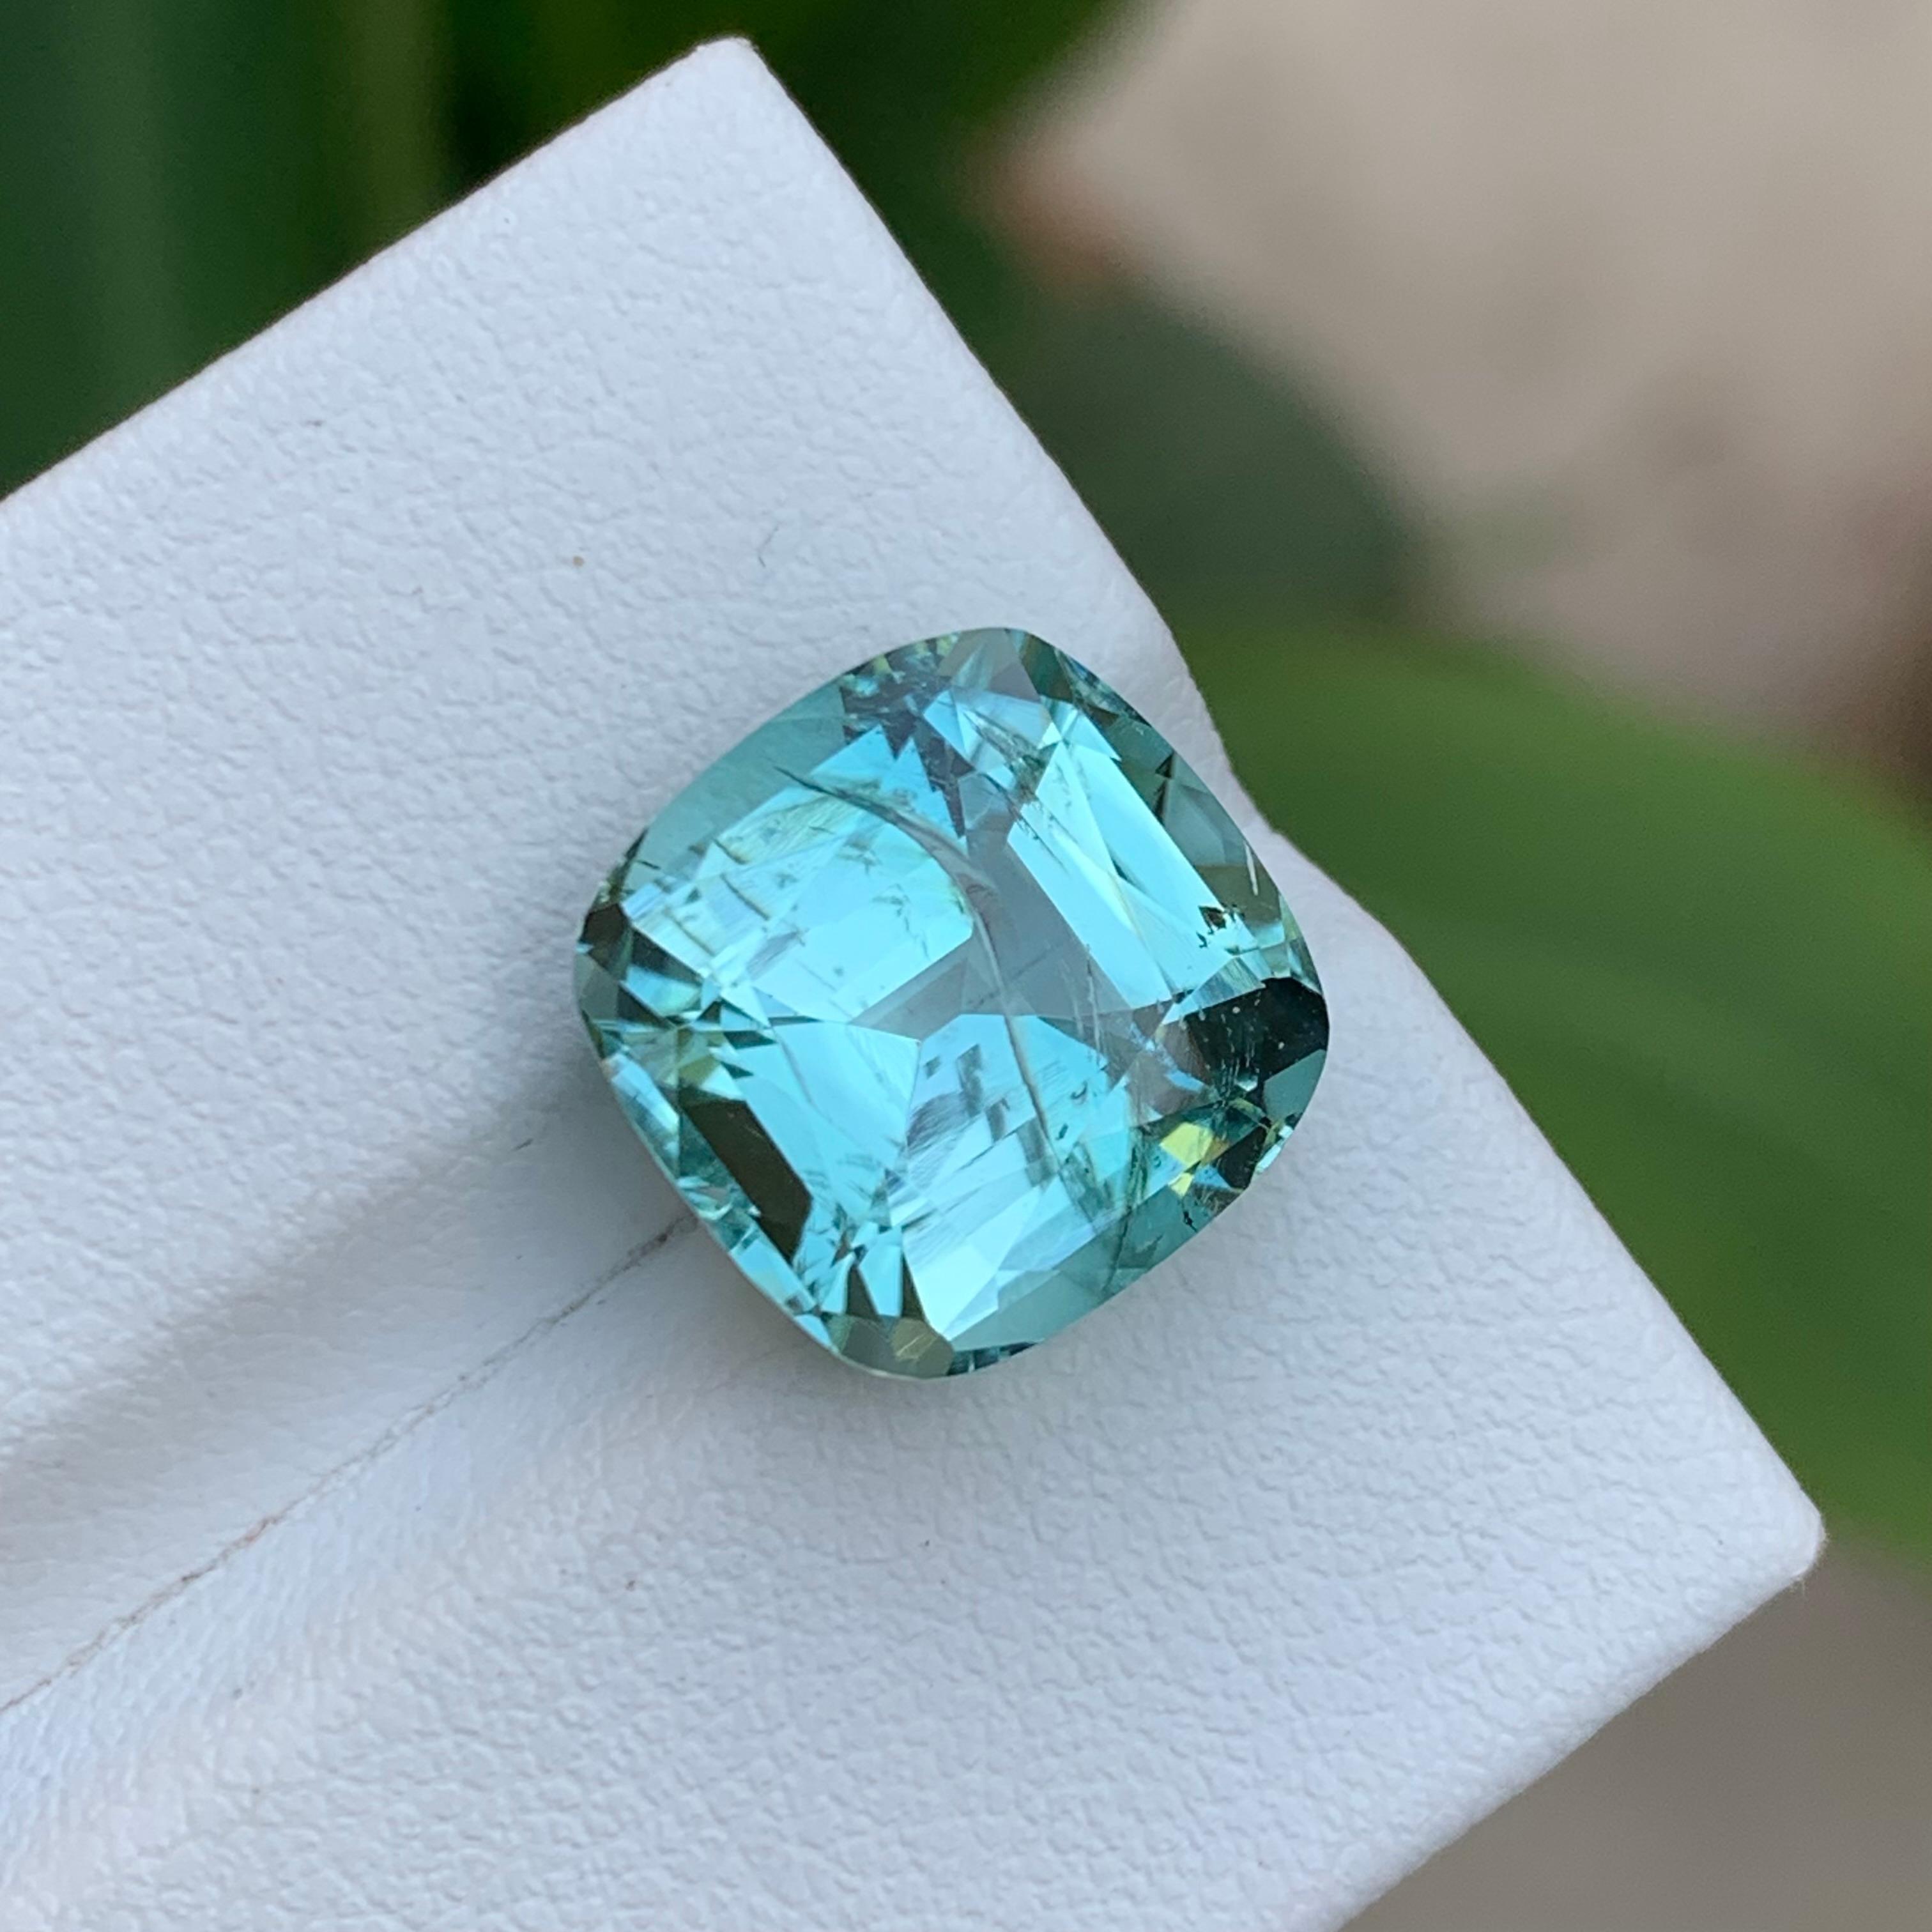 Contemporary Rare Seafoam Blue Natural Tourmaline Gemstone7.75Ct Cushion Cut for Ring/Jewelry For Sale